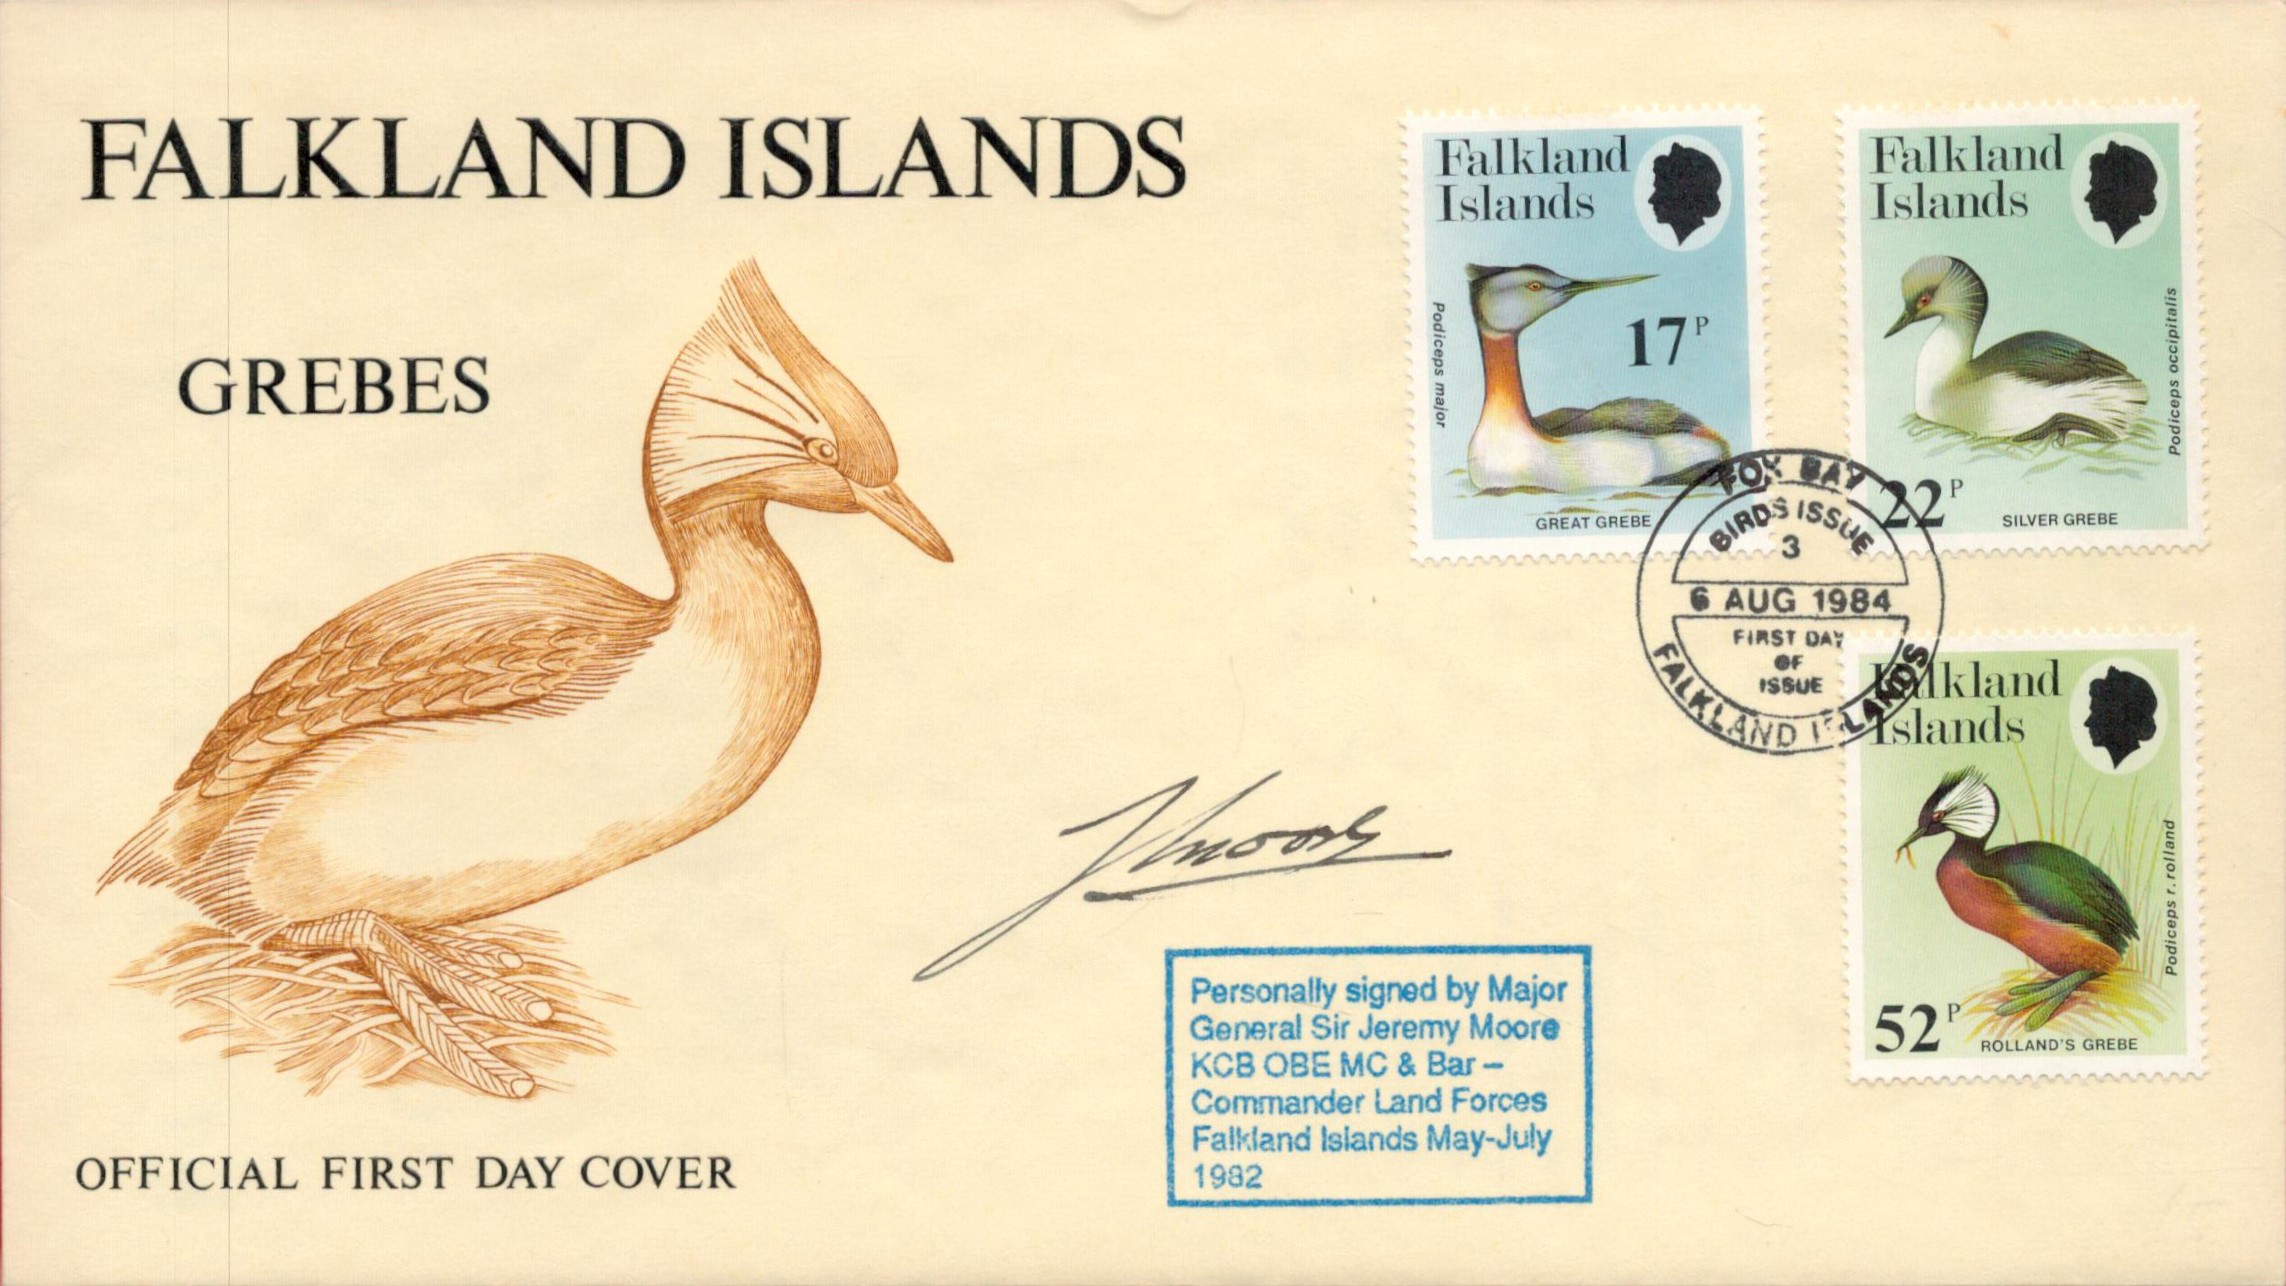 Falklands War General Sir Jeremy Moore KCB Signed Falkland Islands Official First Day Cover With 3